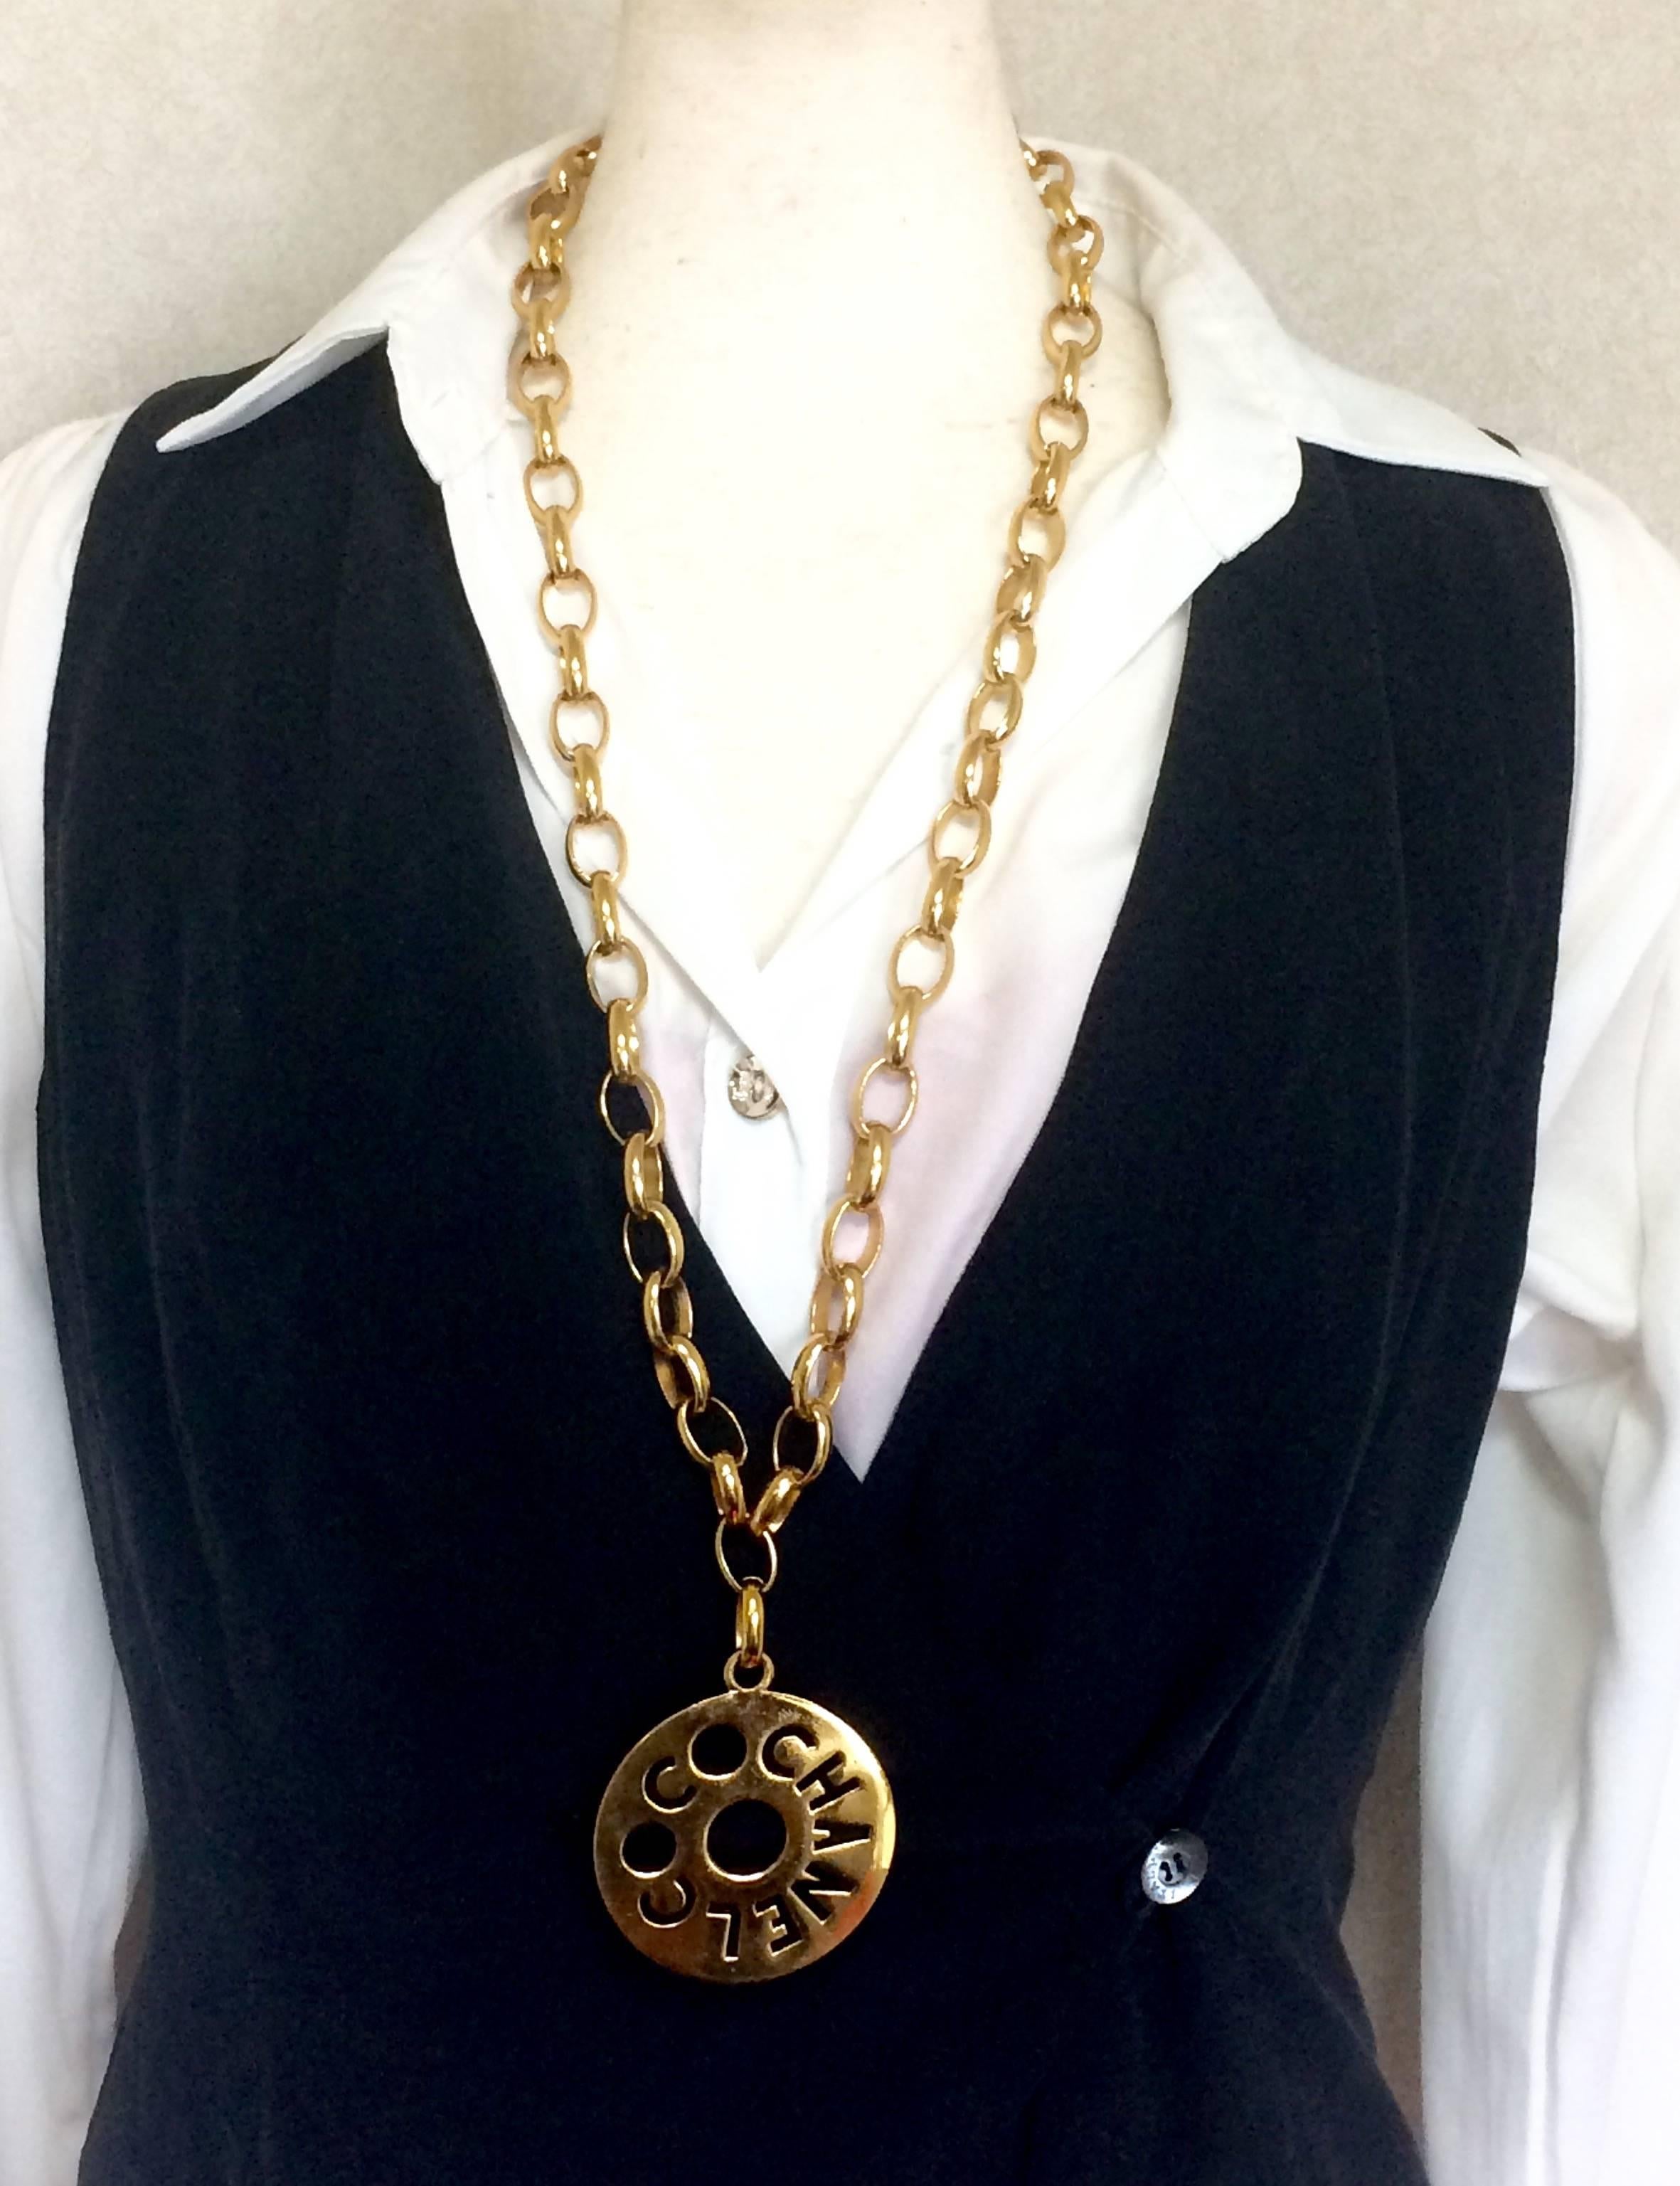 1980s. Vintage CHANEL golden chain necklace, chain belt with round logo COCO cutout pendant top. Rare Chanel mode jewelry from the 80's.

MINT, excellent vintage condition!
Introducing another hard-to-find long chain necklace that can also be worn